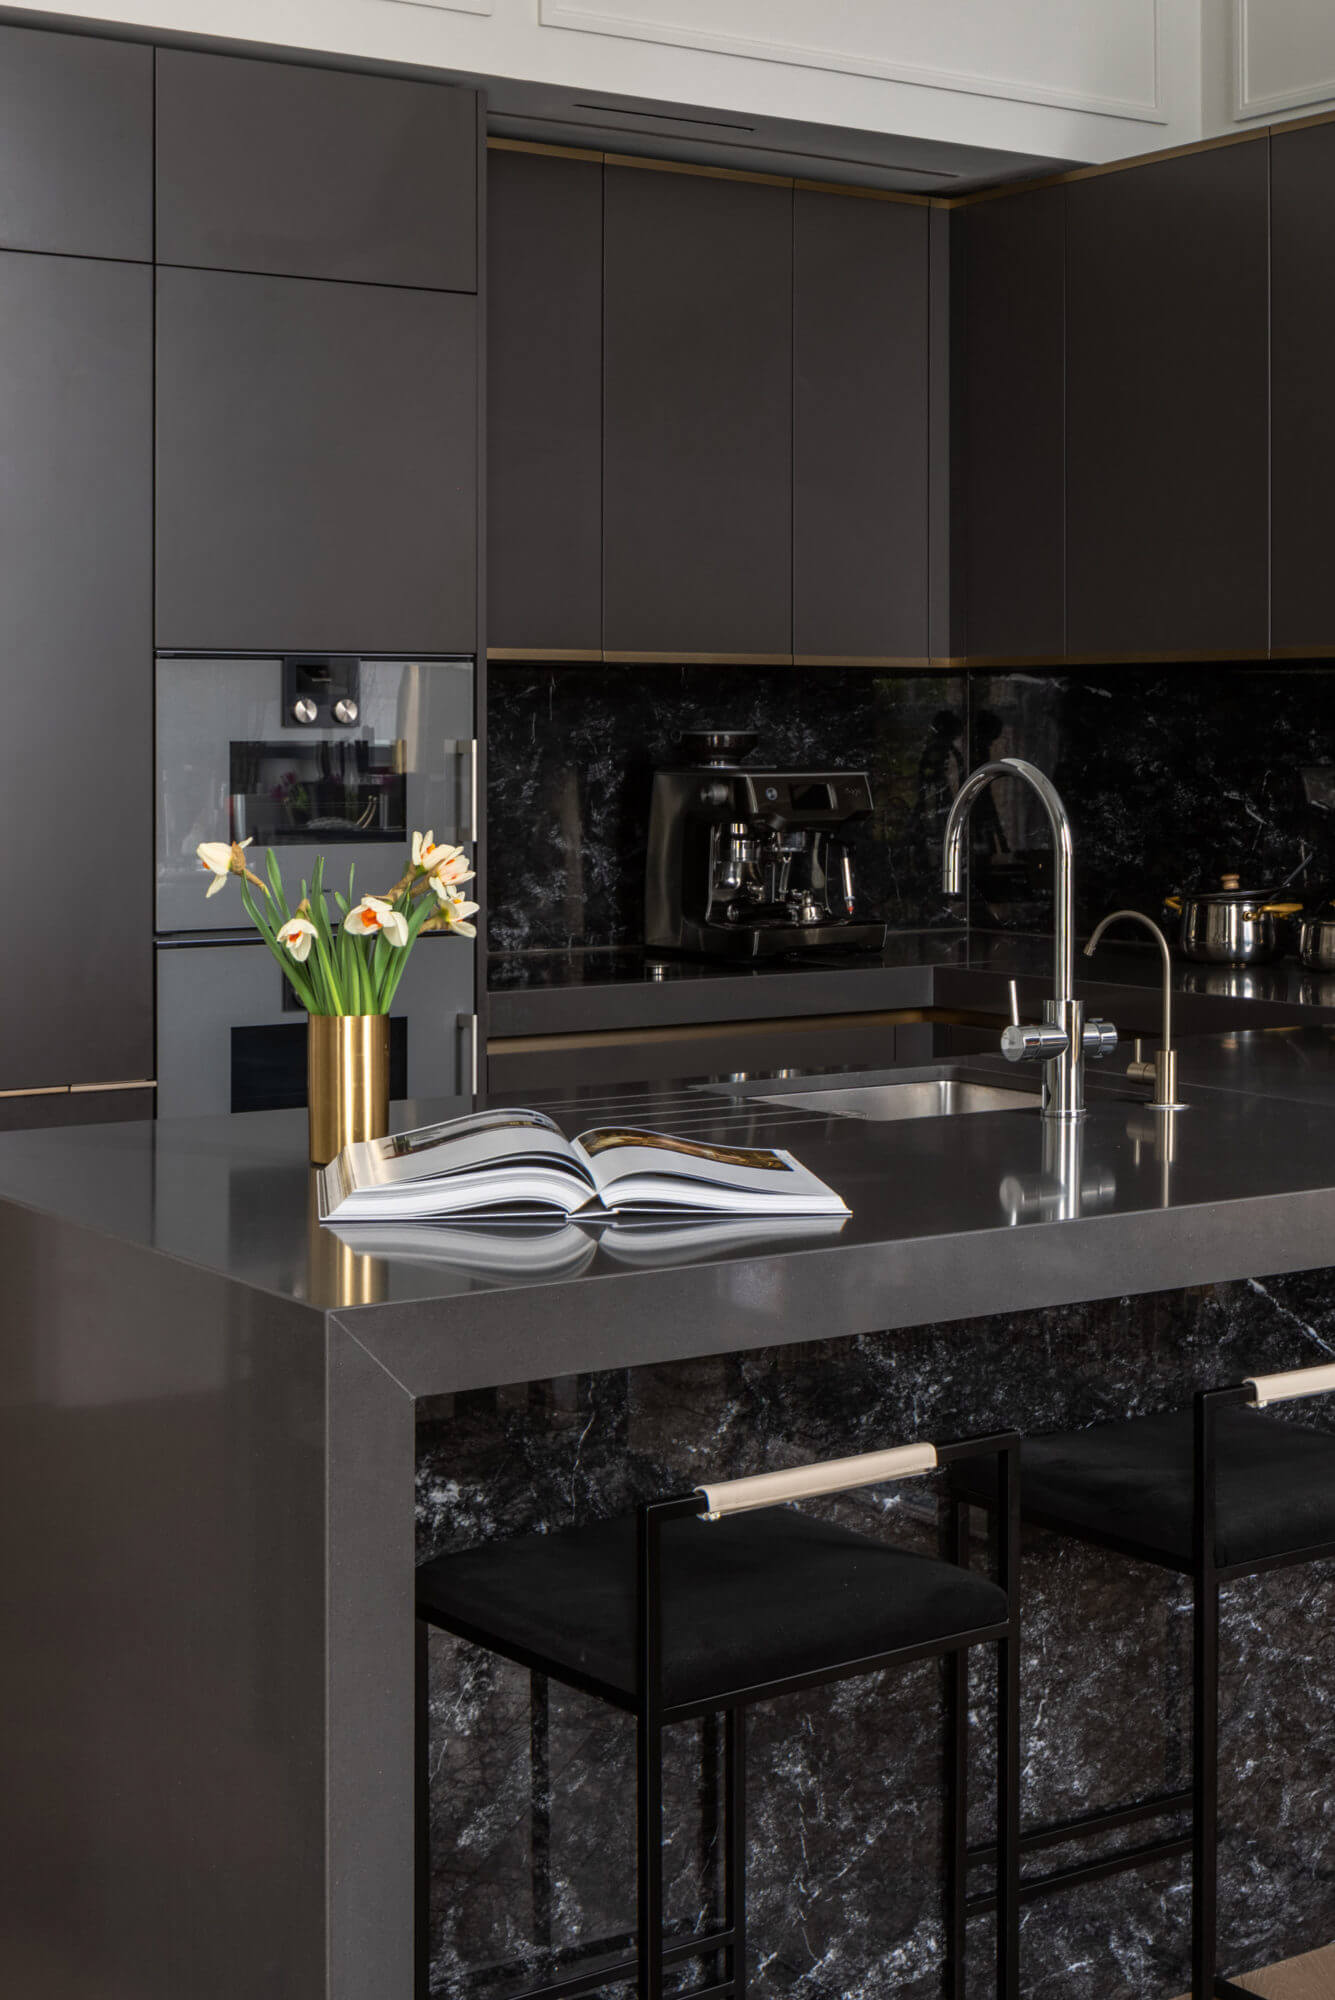 What Makes a Luxury Kitchen - Apartment In Regent Park Filled With Light and Luxury - Striking and Timeless Black and White Interior Design